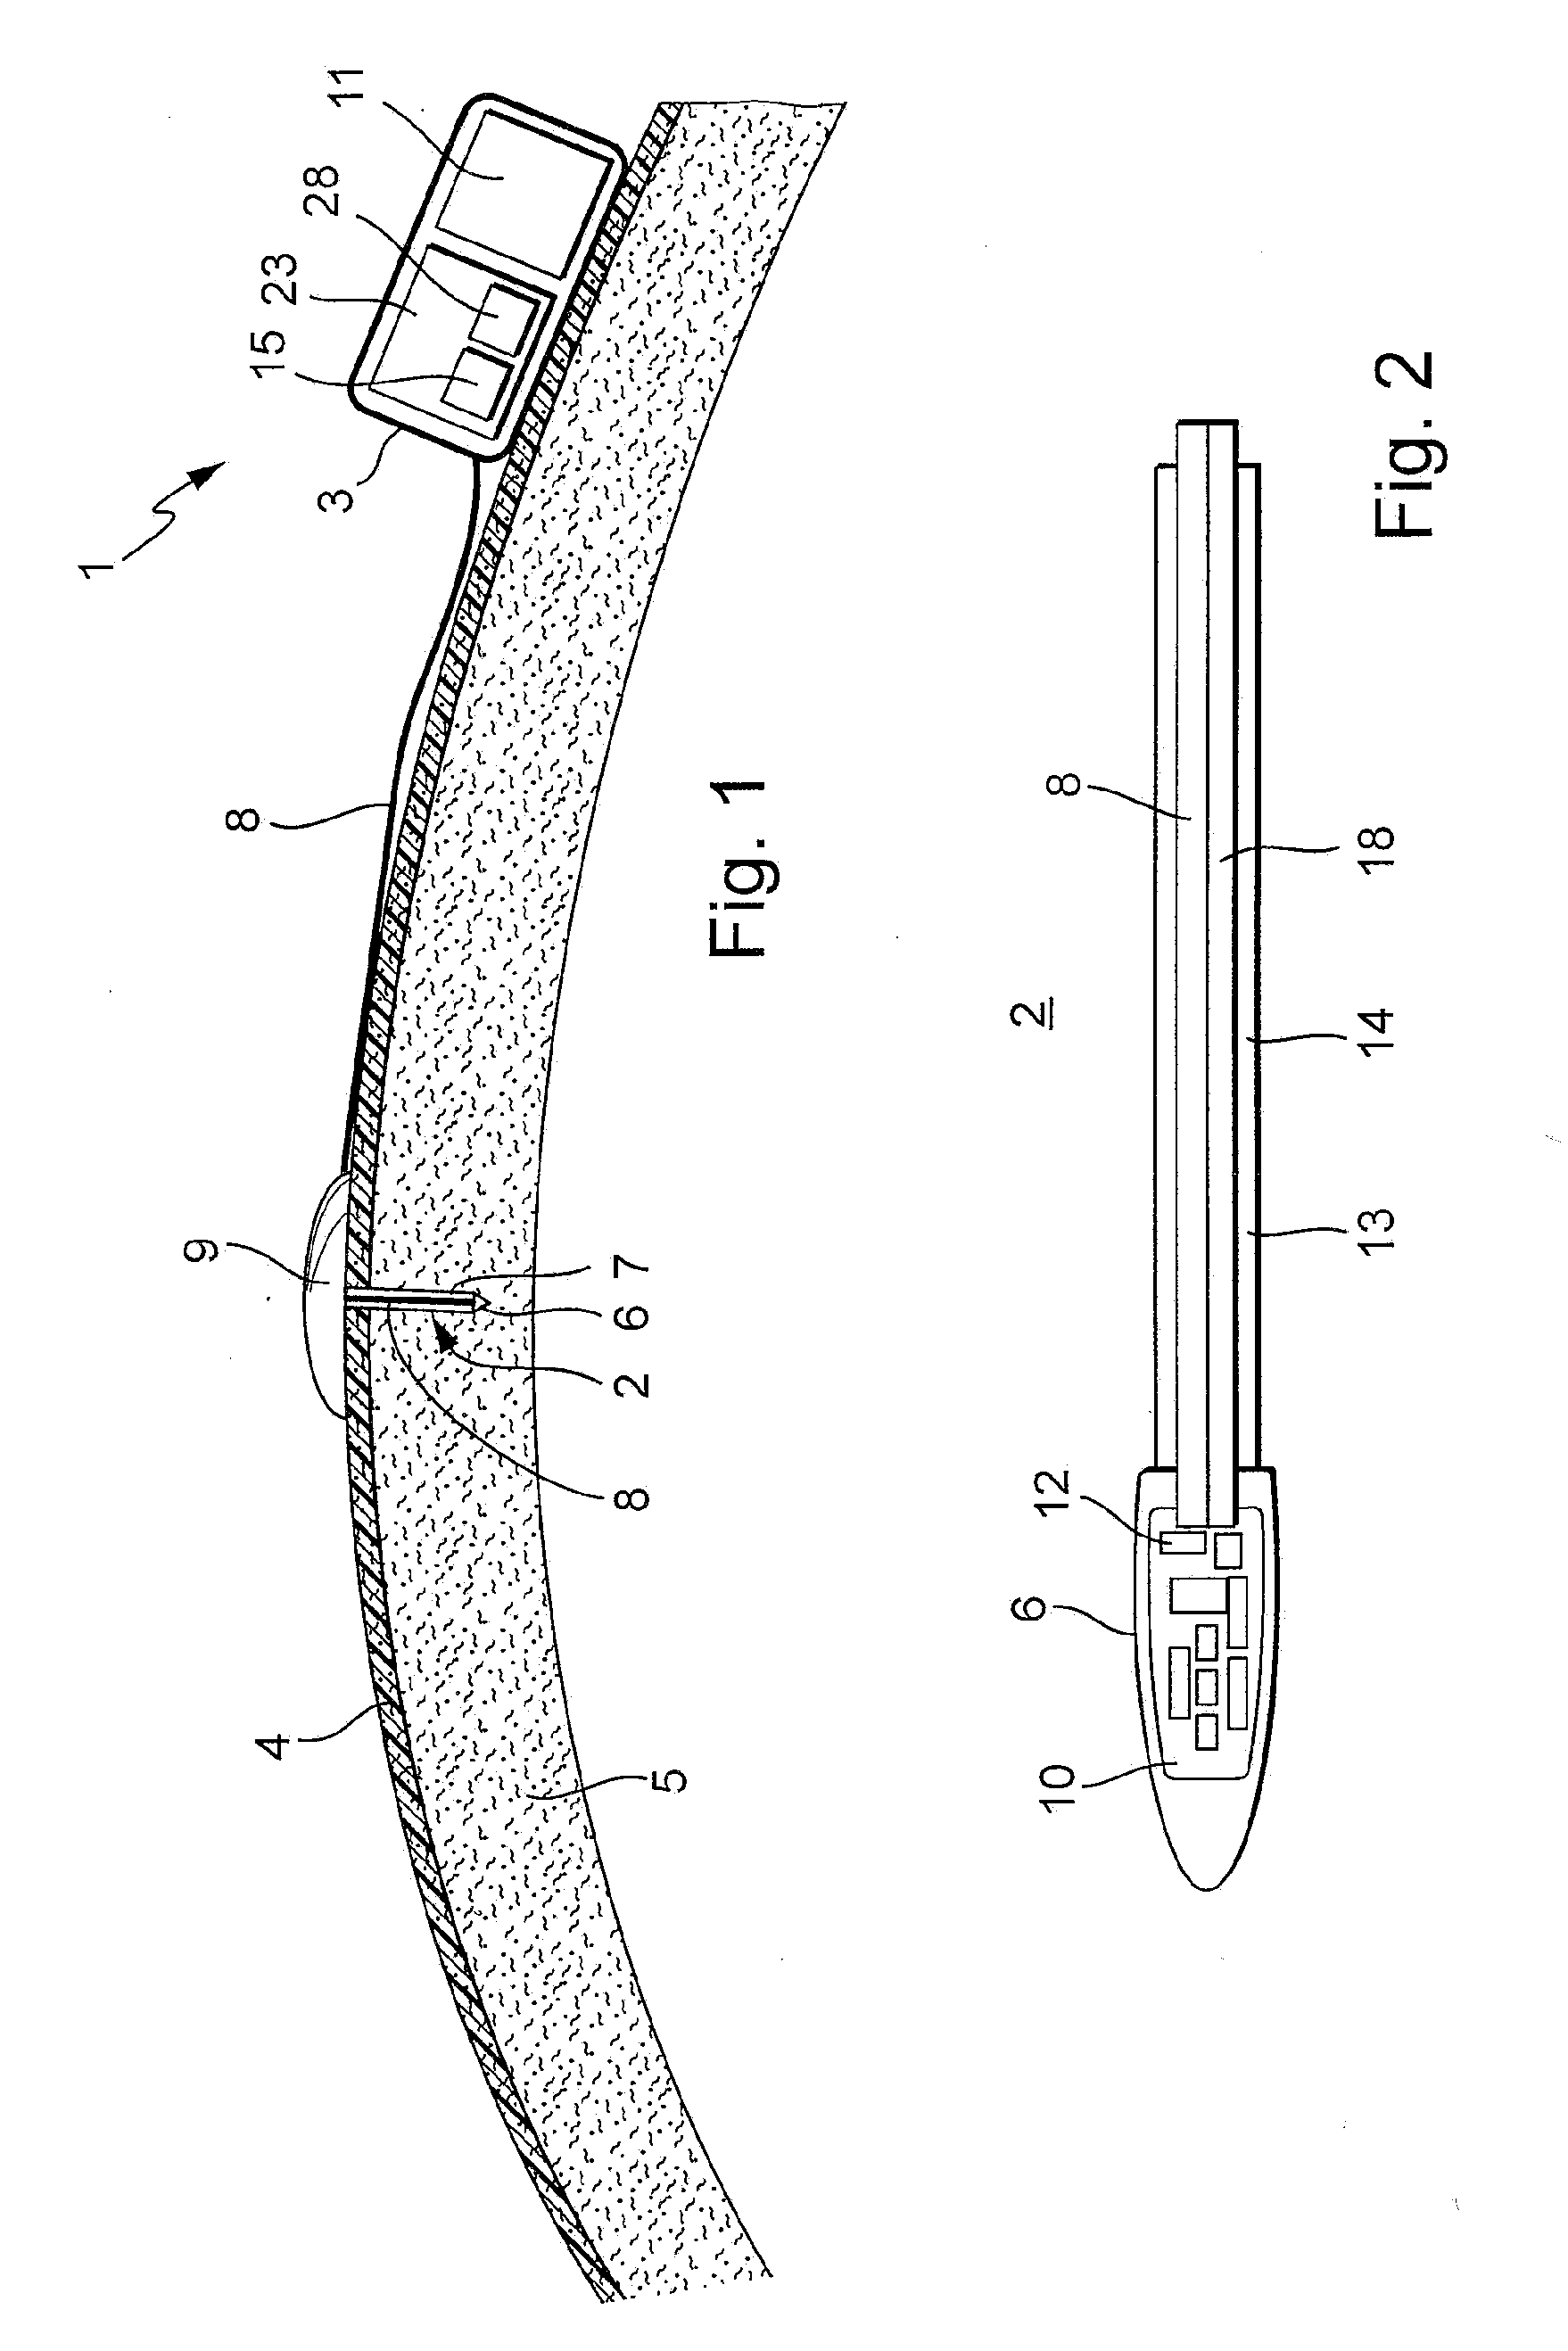 Analysis device for in vivo determination of an analyte in a patient's body